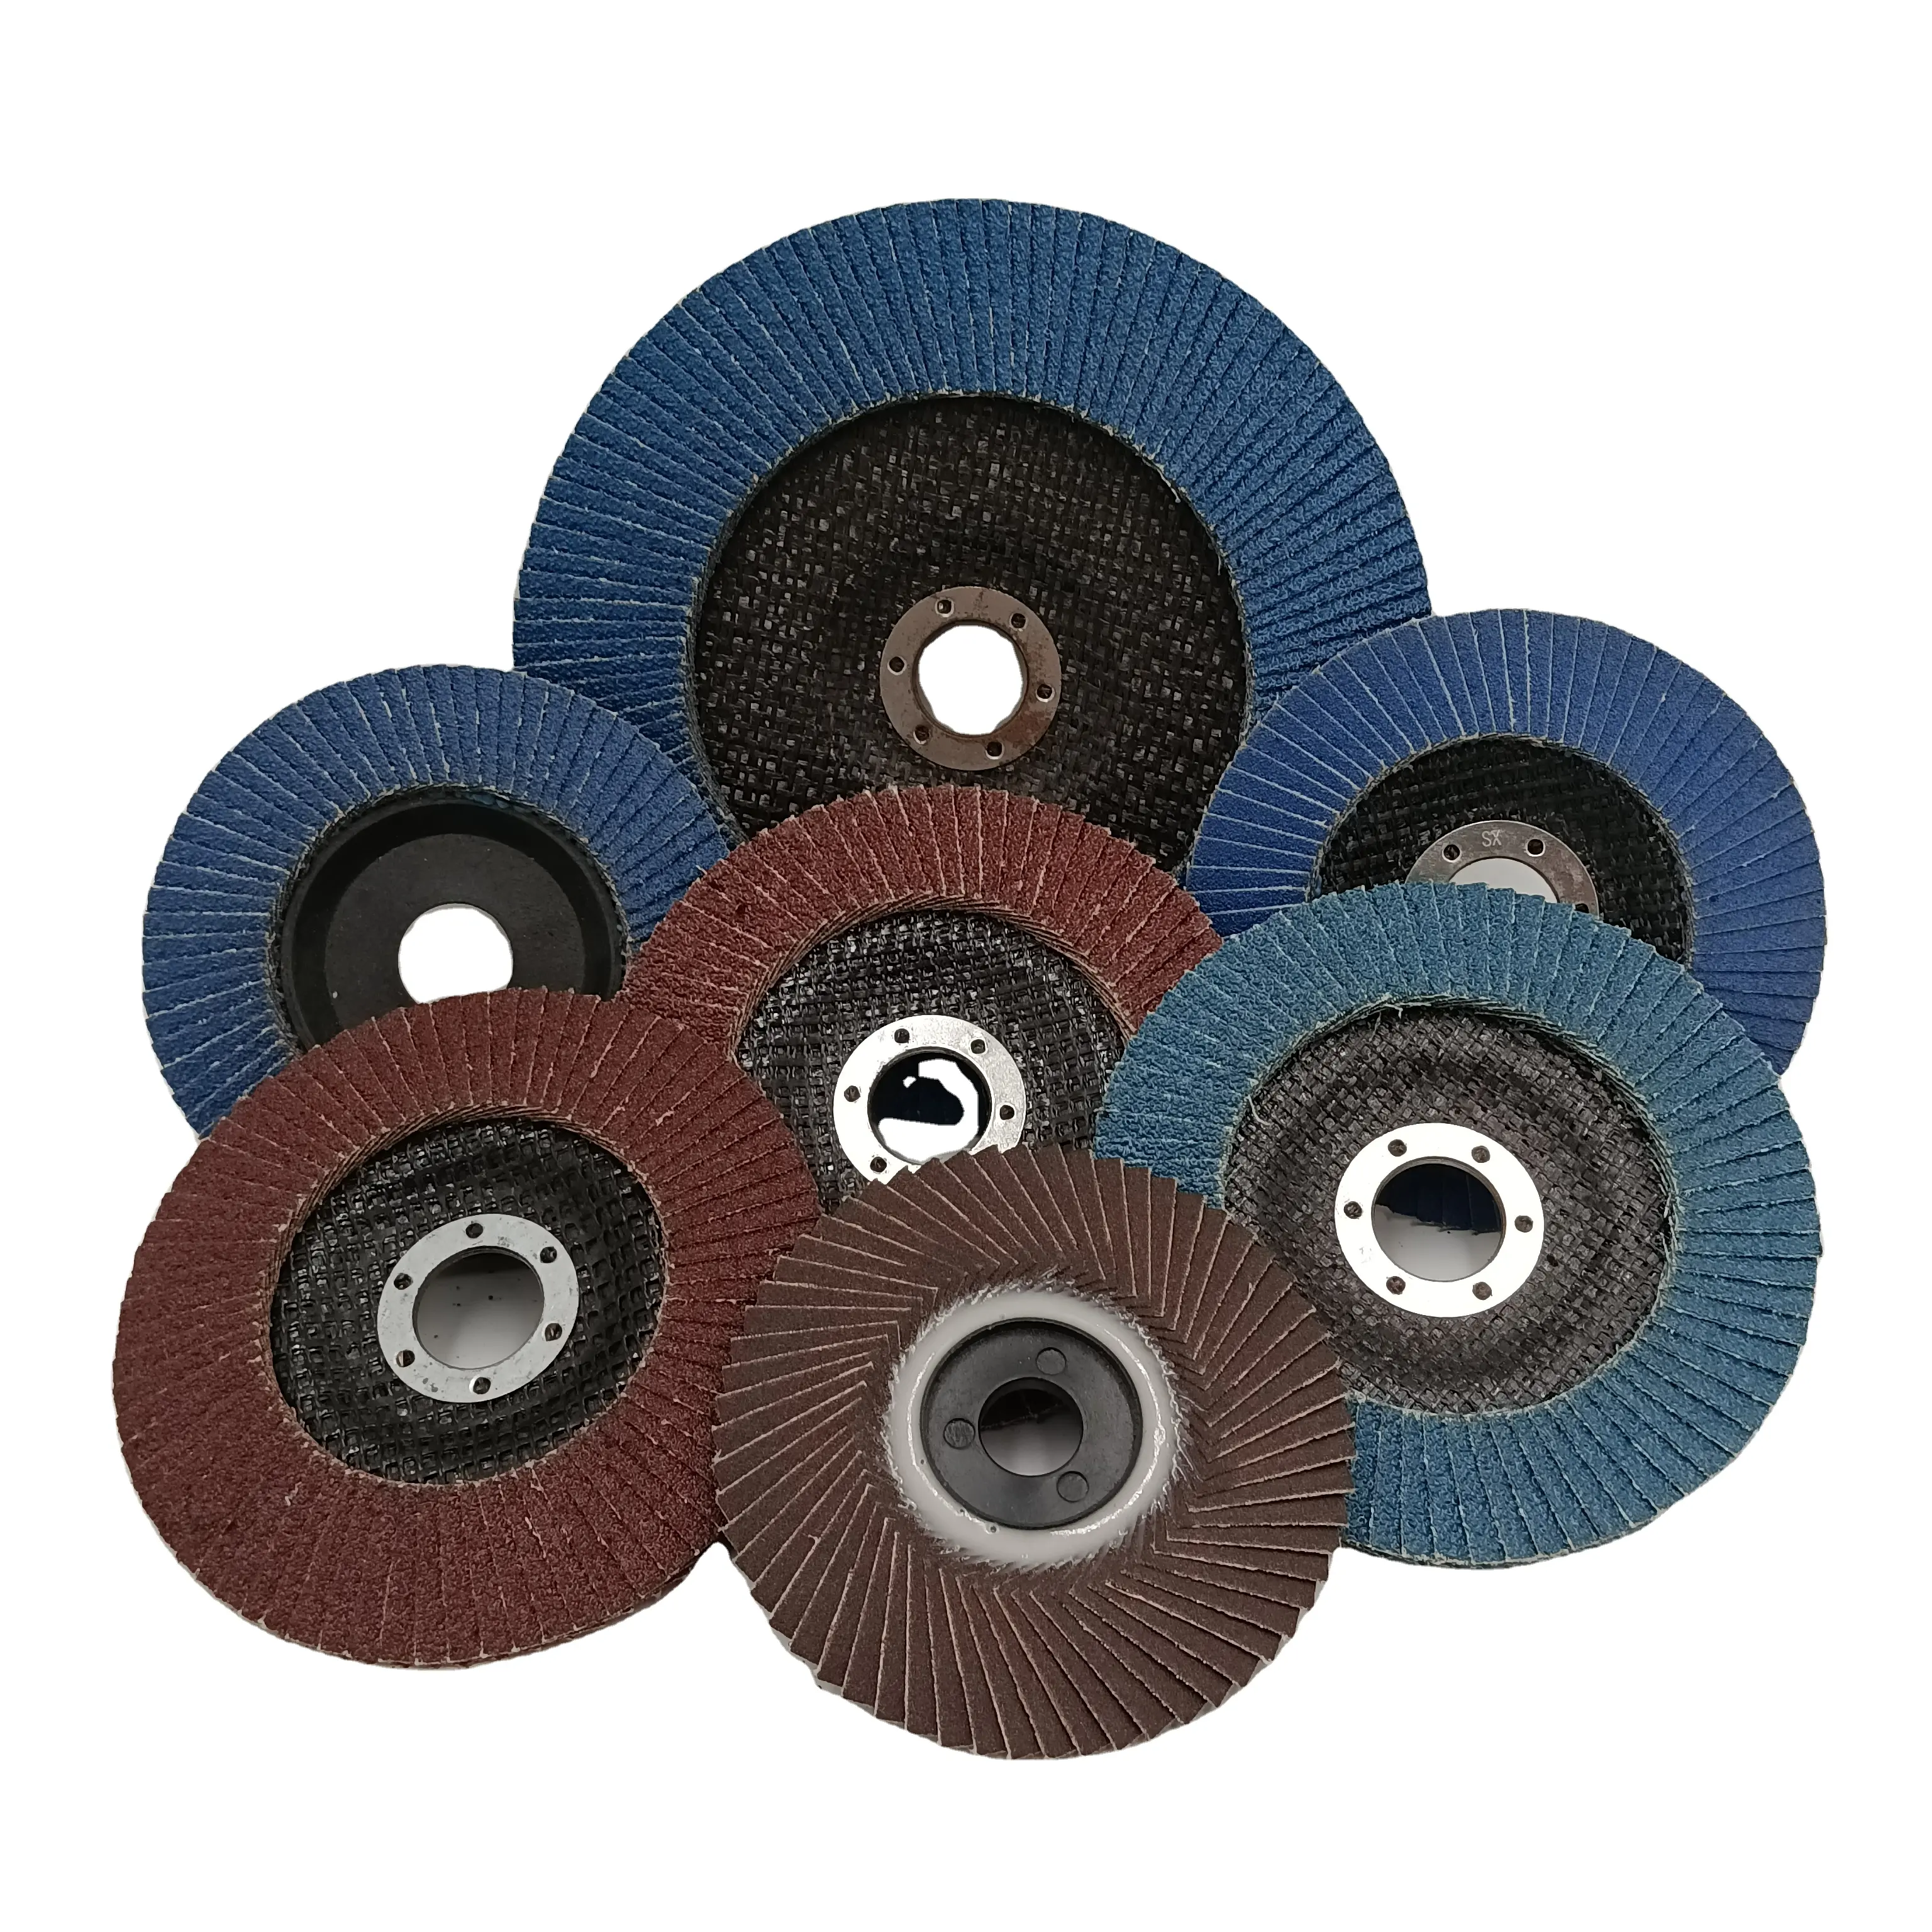 A factory specializing in the production of all different kinds of the flap disks